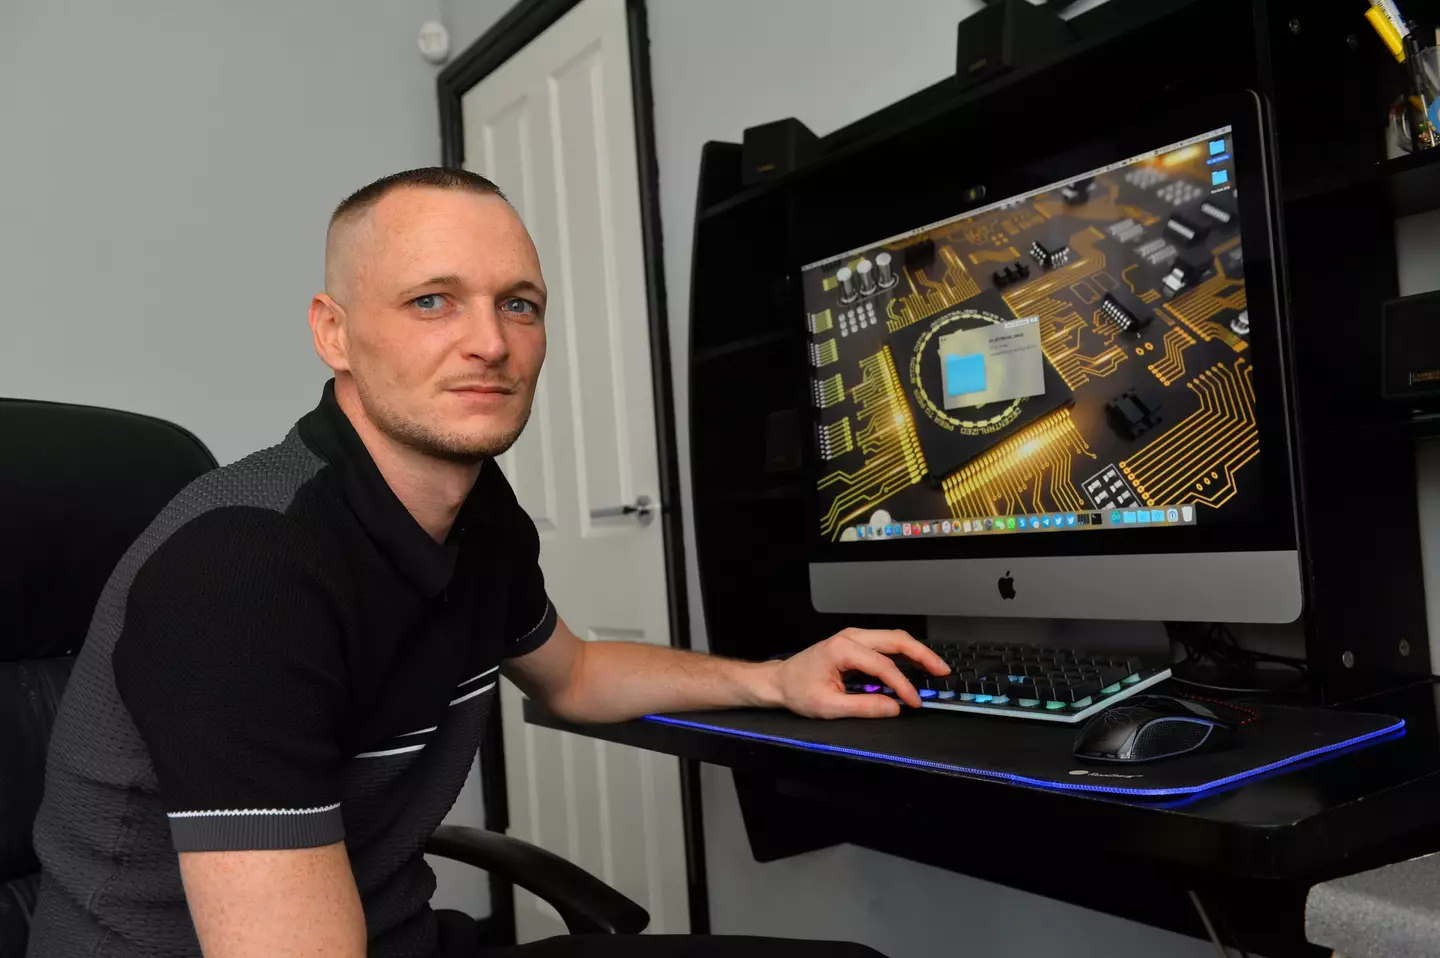 Former IT systems engineer James Howells is determined to recover the hard drive.